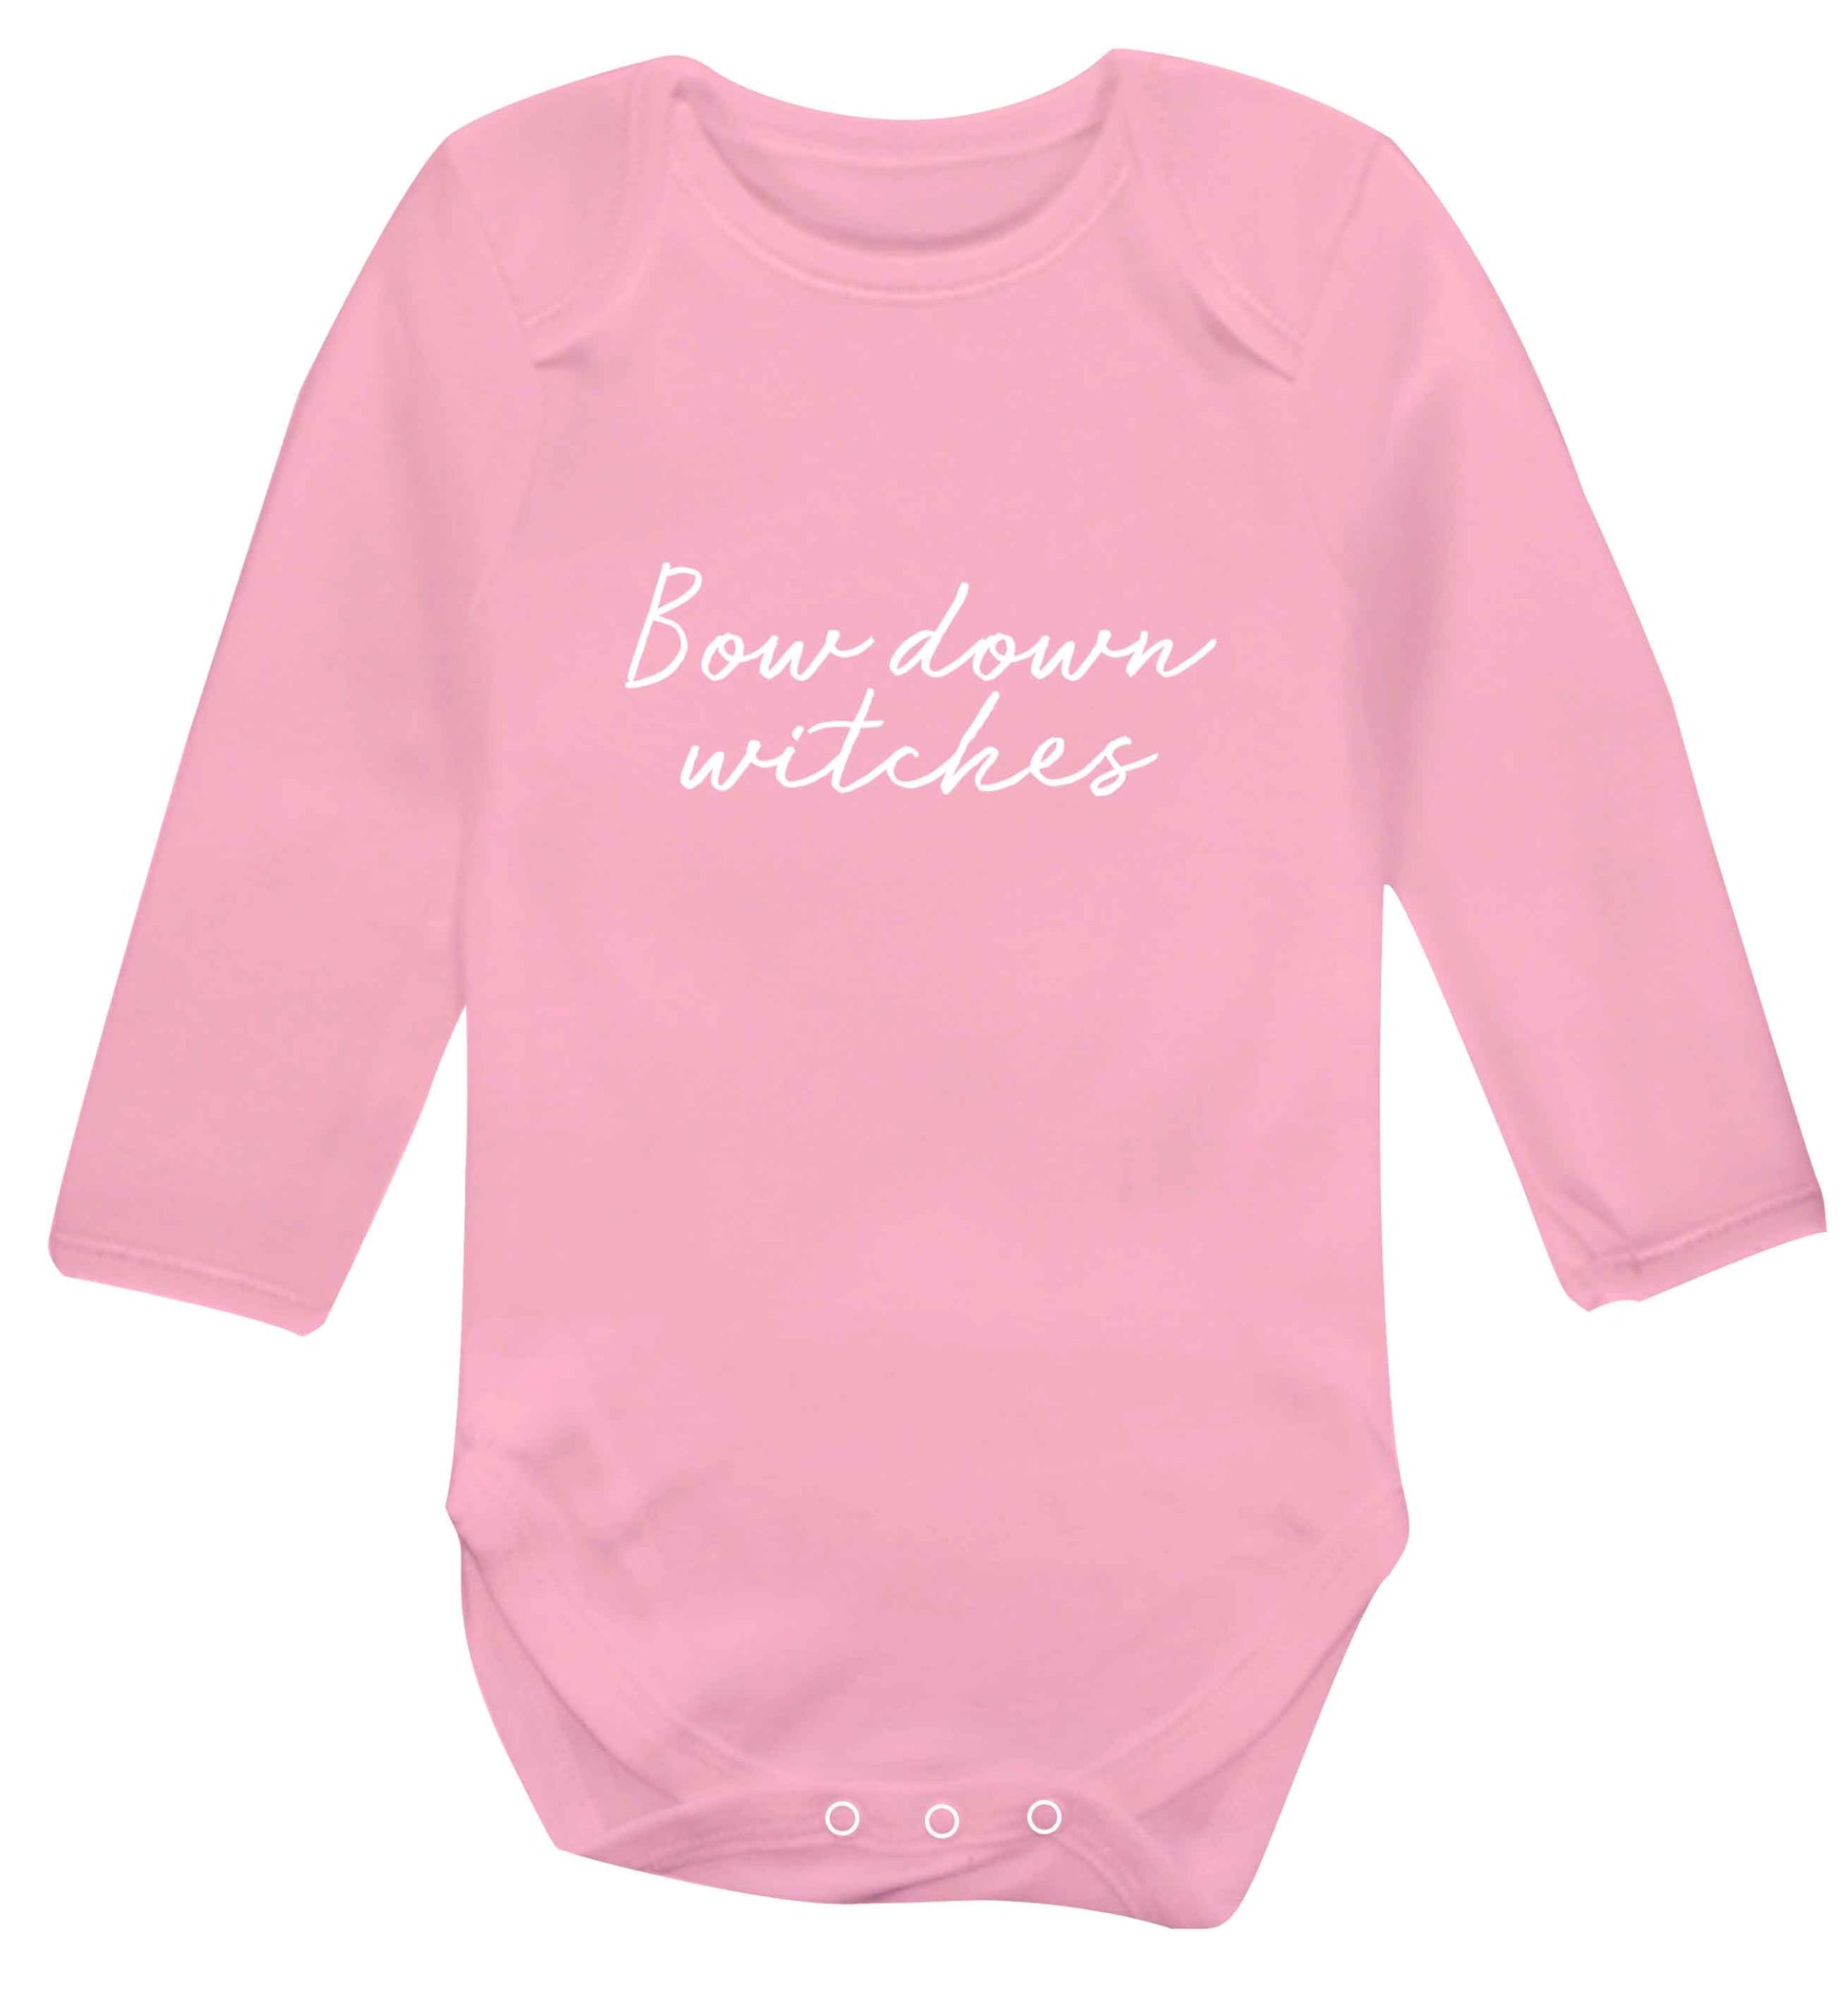 Bow down witches baby vest long sleeved pale pink 6-12 months